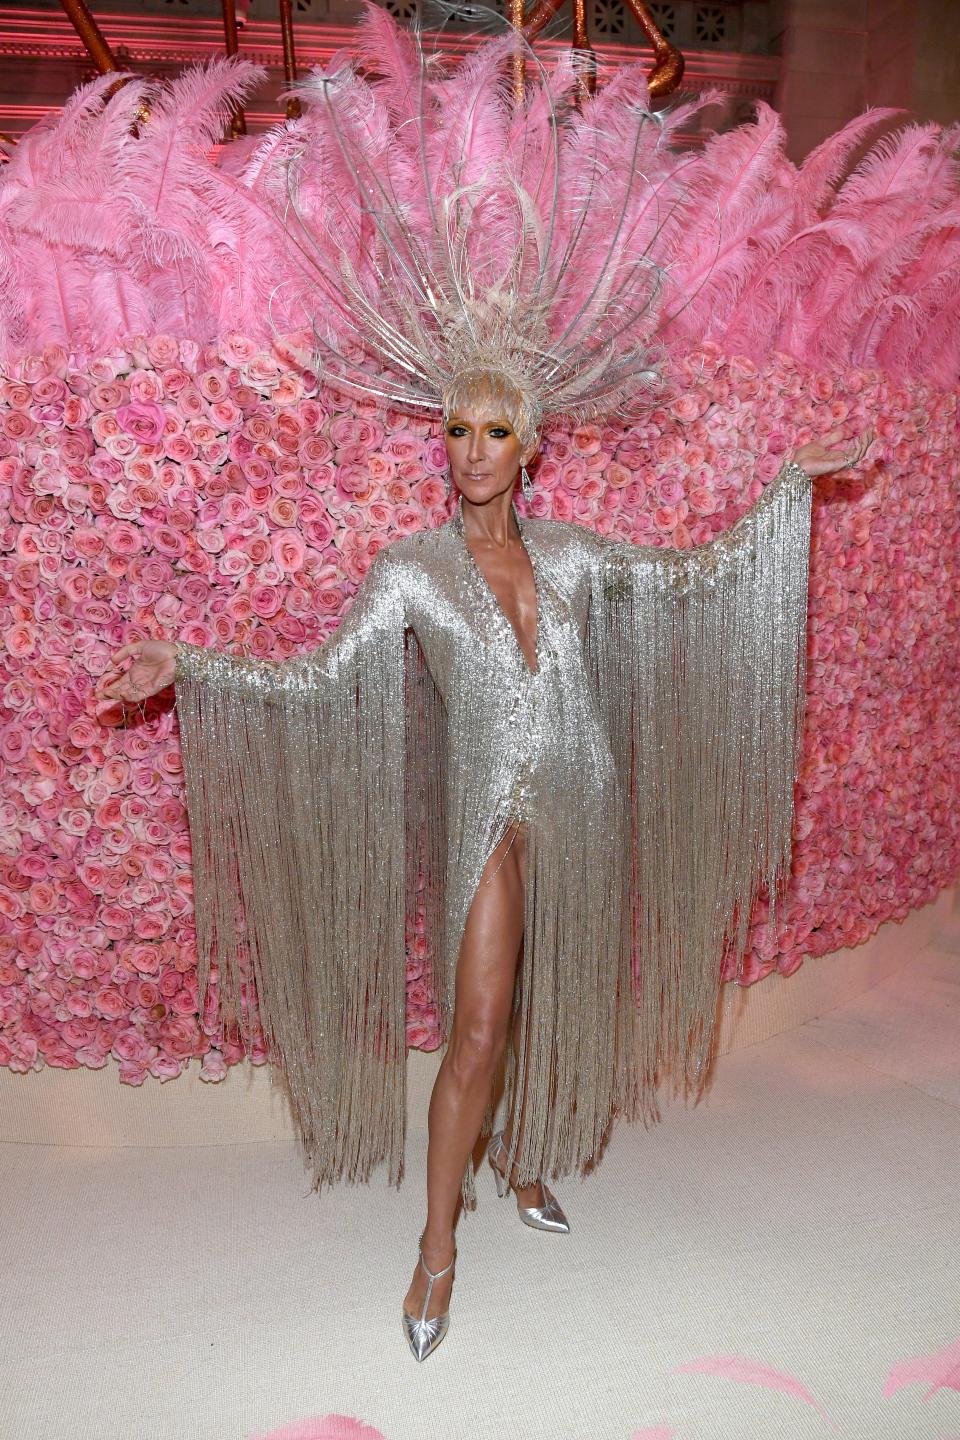 Celine in a long silver fringe dress that extends to her wrists. She also has a large feather headpiece on.